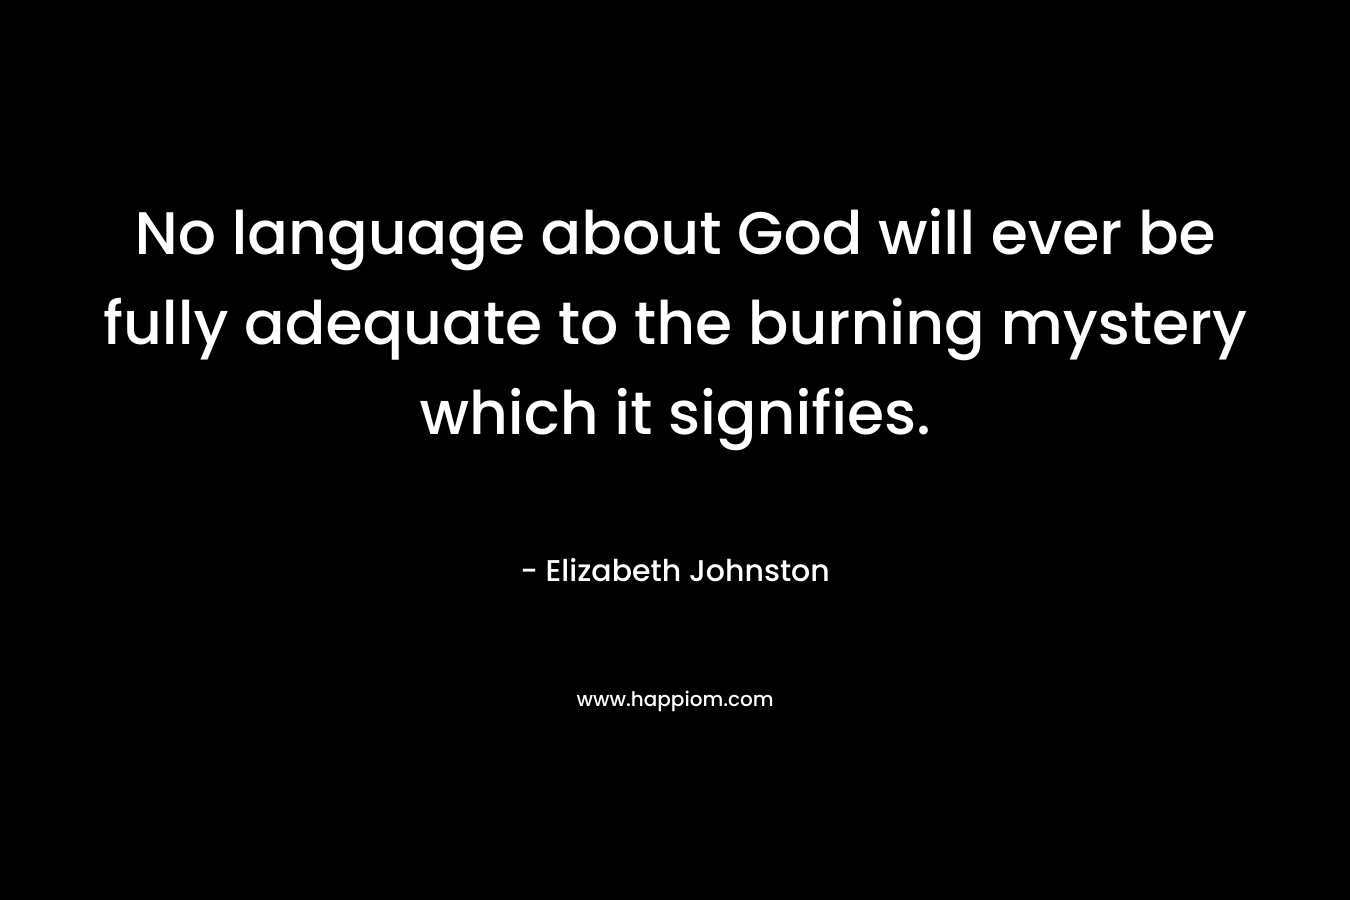 No language about God will ever be fully adequate to the burning mystery which it signifies. – Elizabeth Johnston